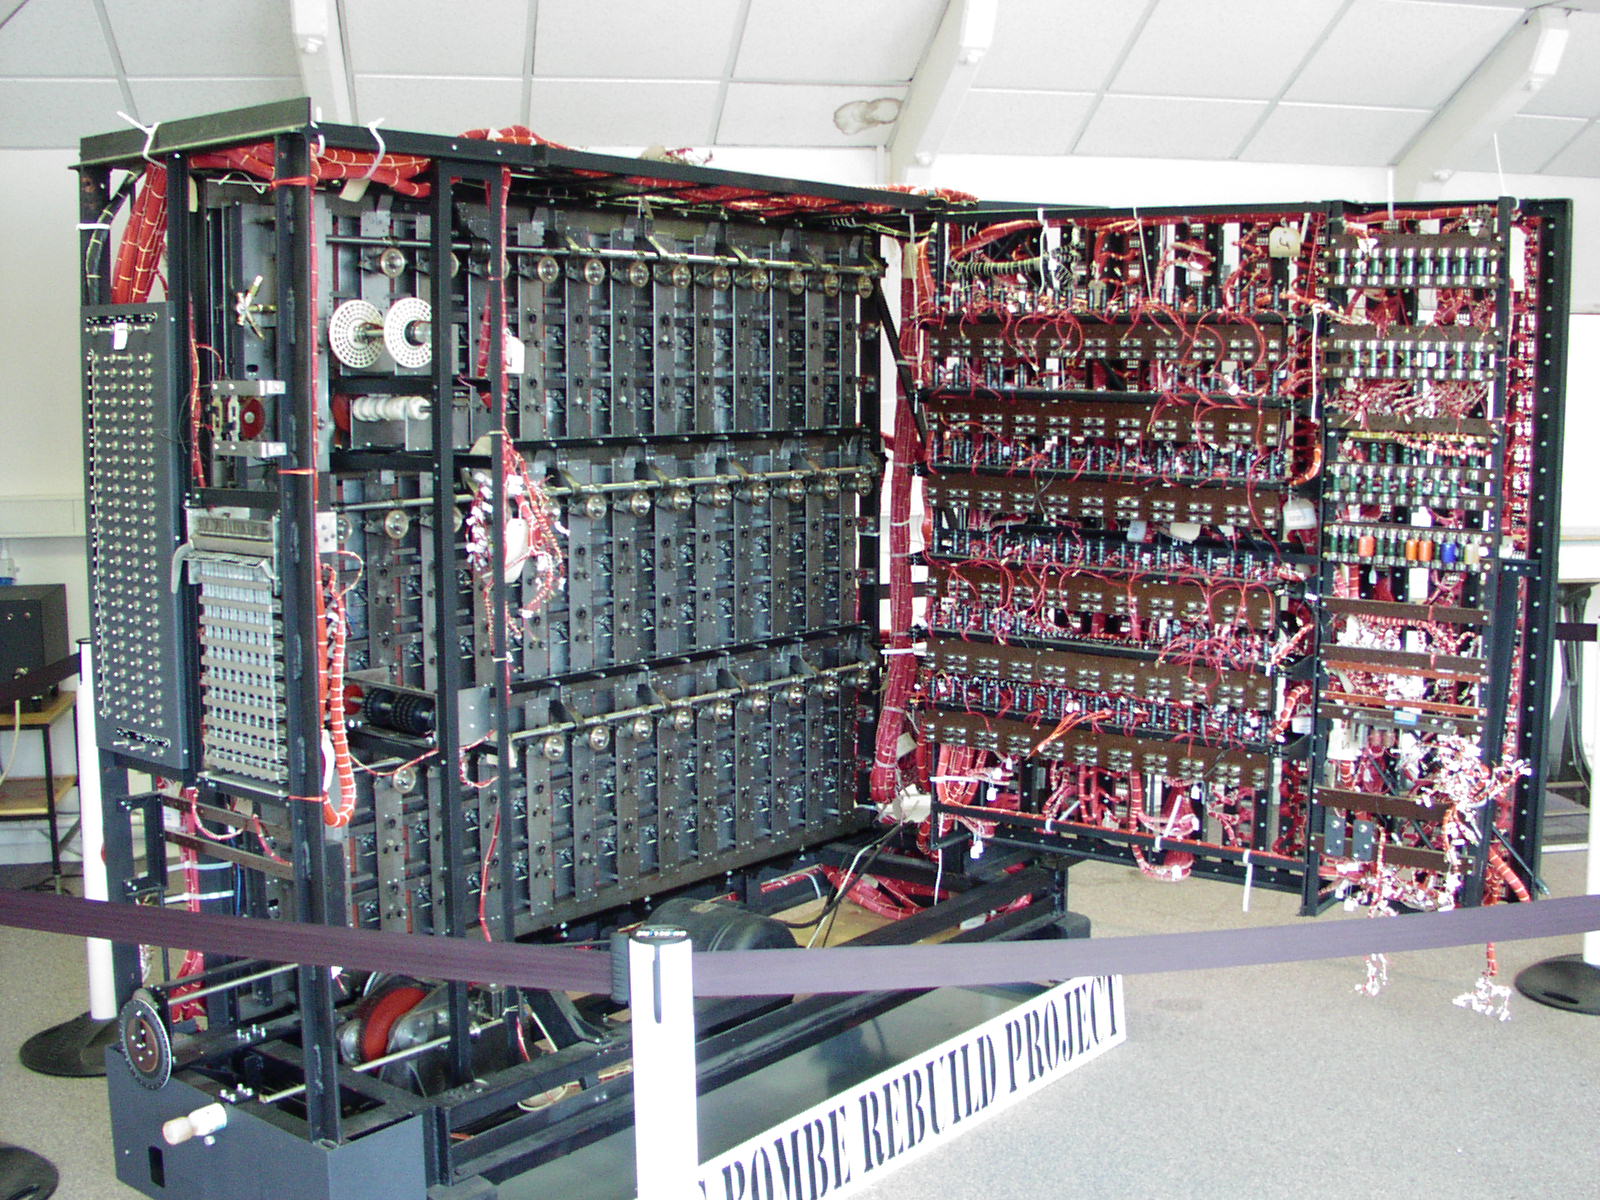 The Turing Bombe